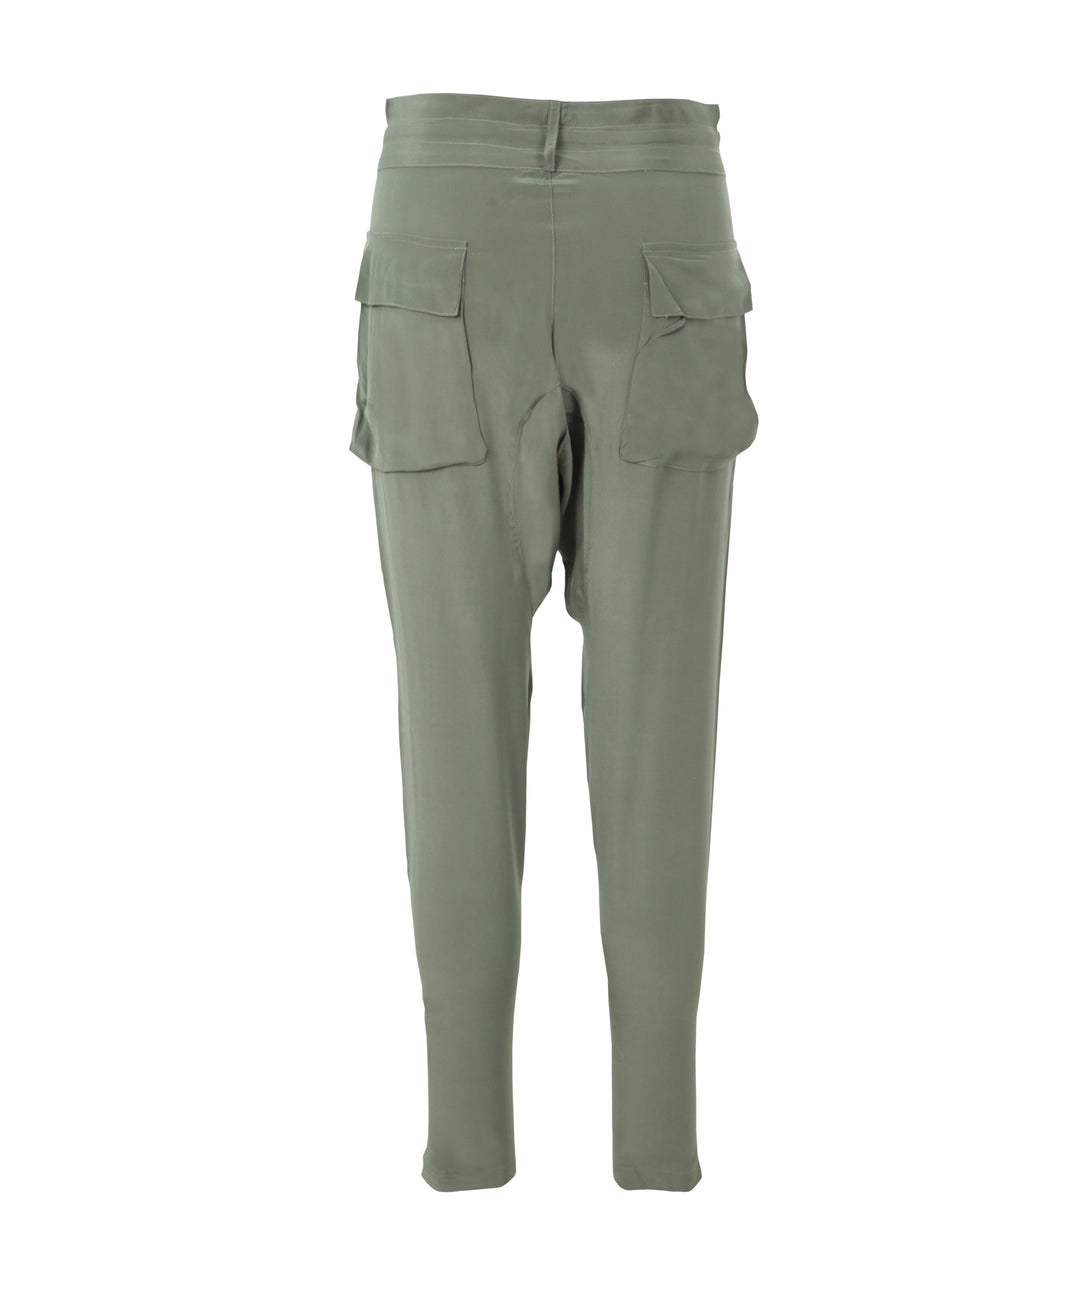 Silk Taupe drawstring trousers